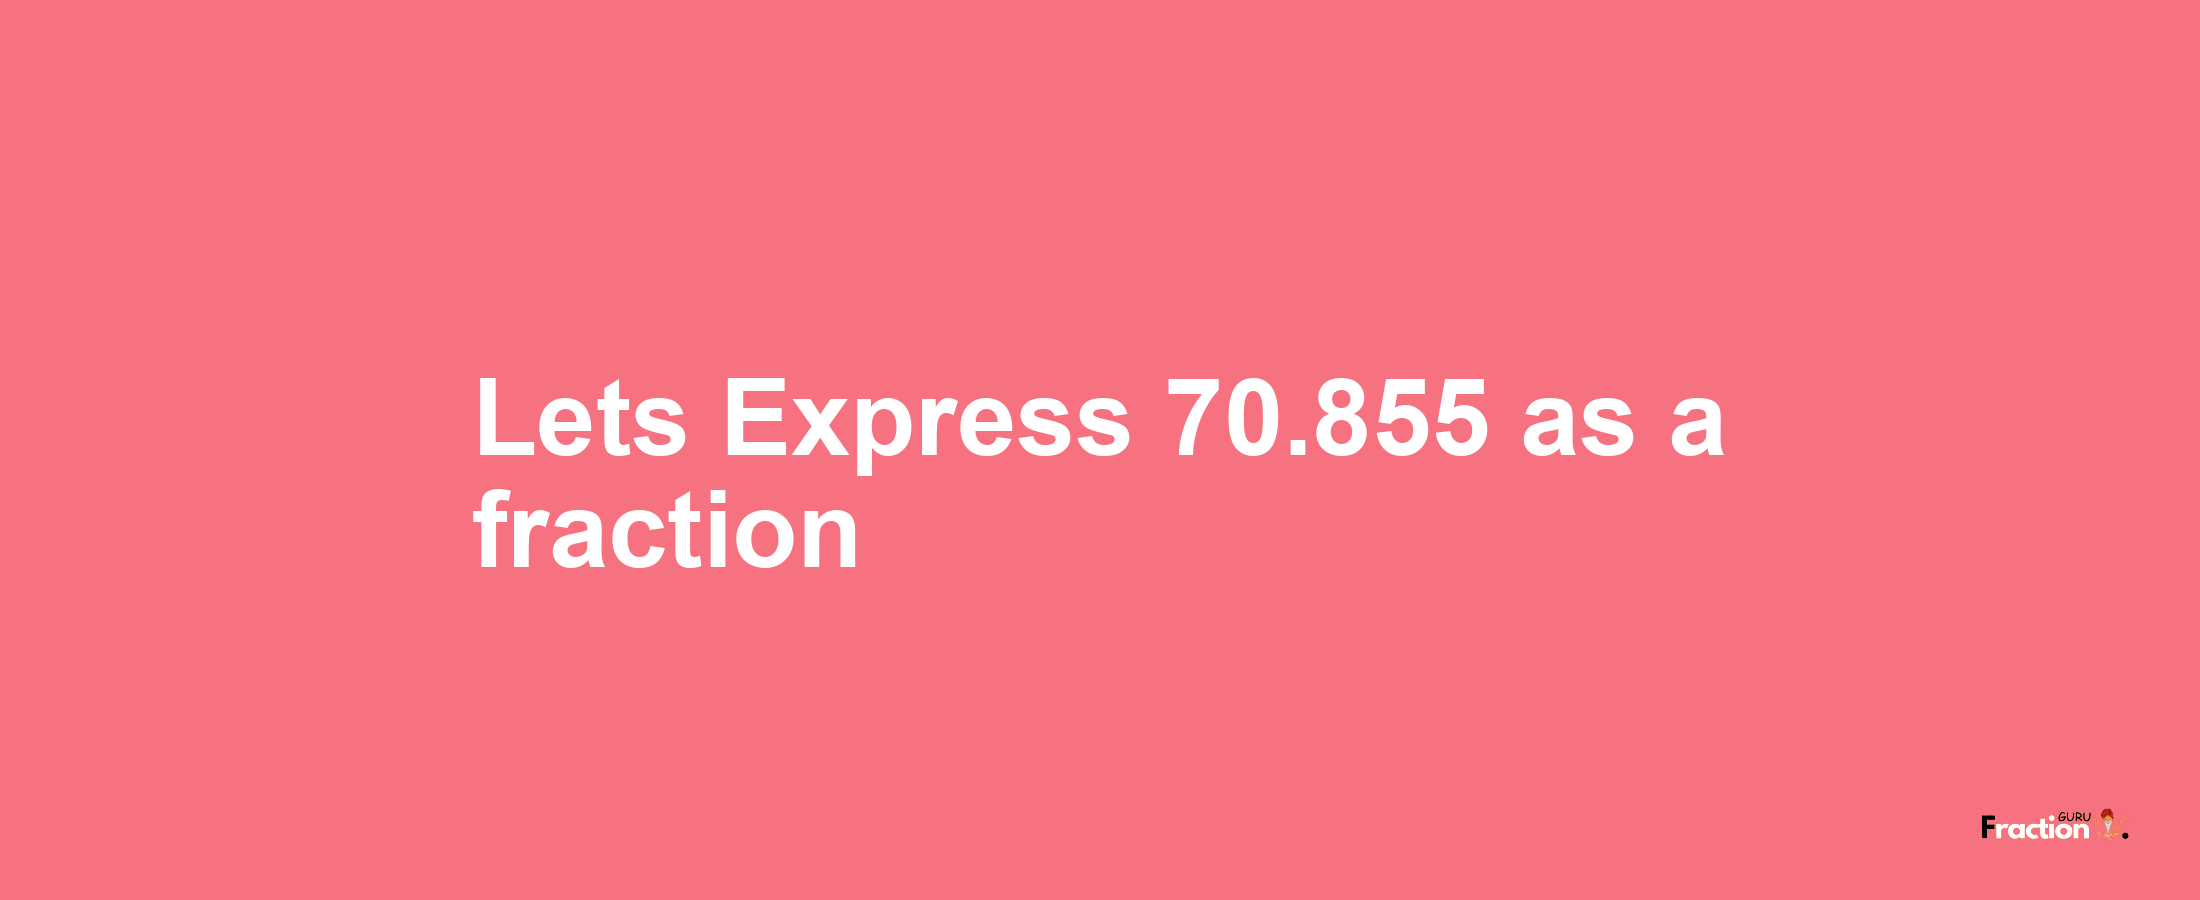 Lets Express 70.855 as afraction